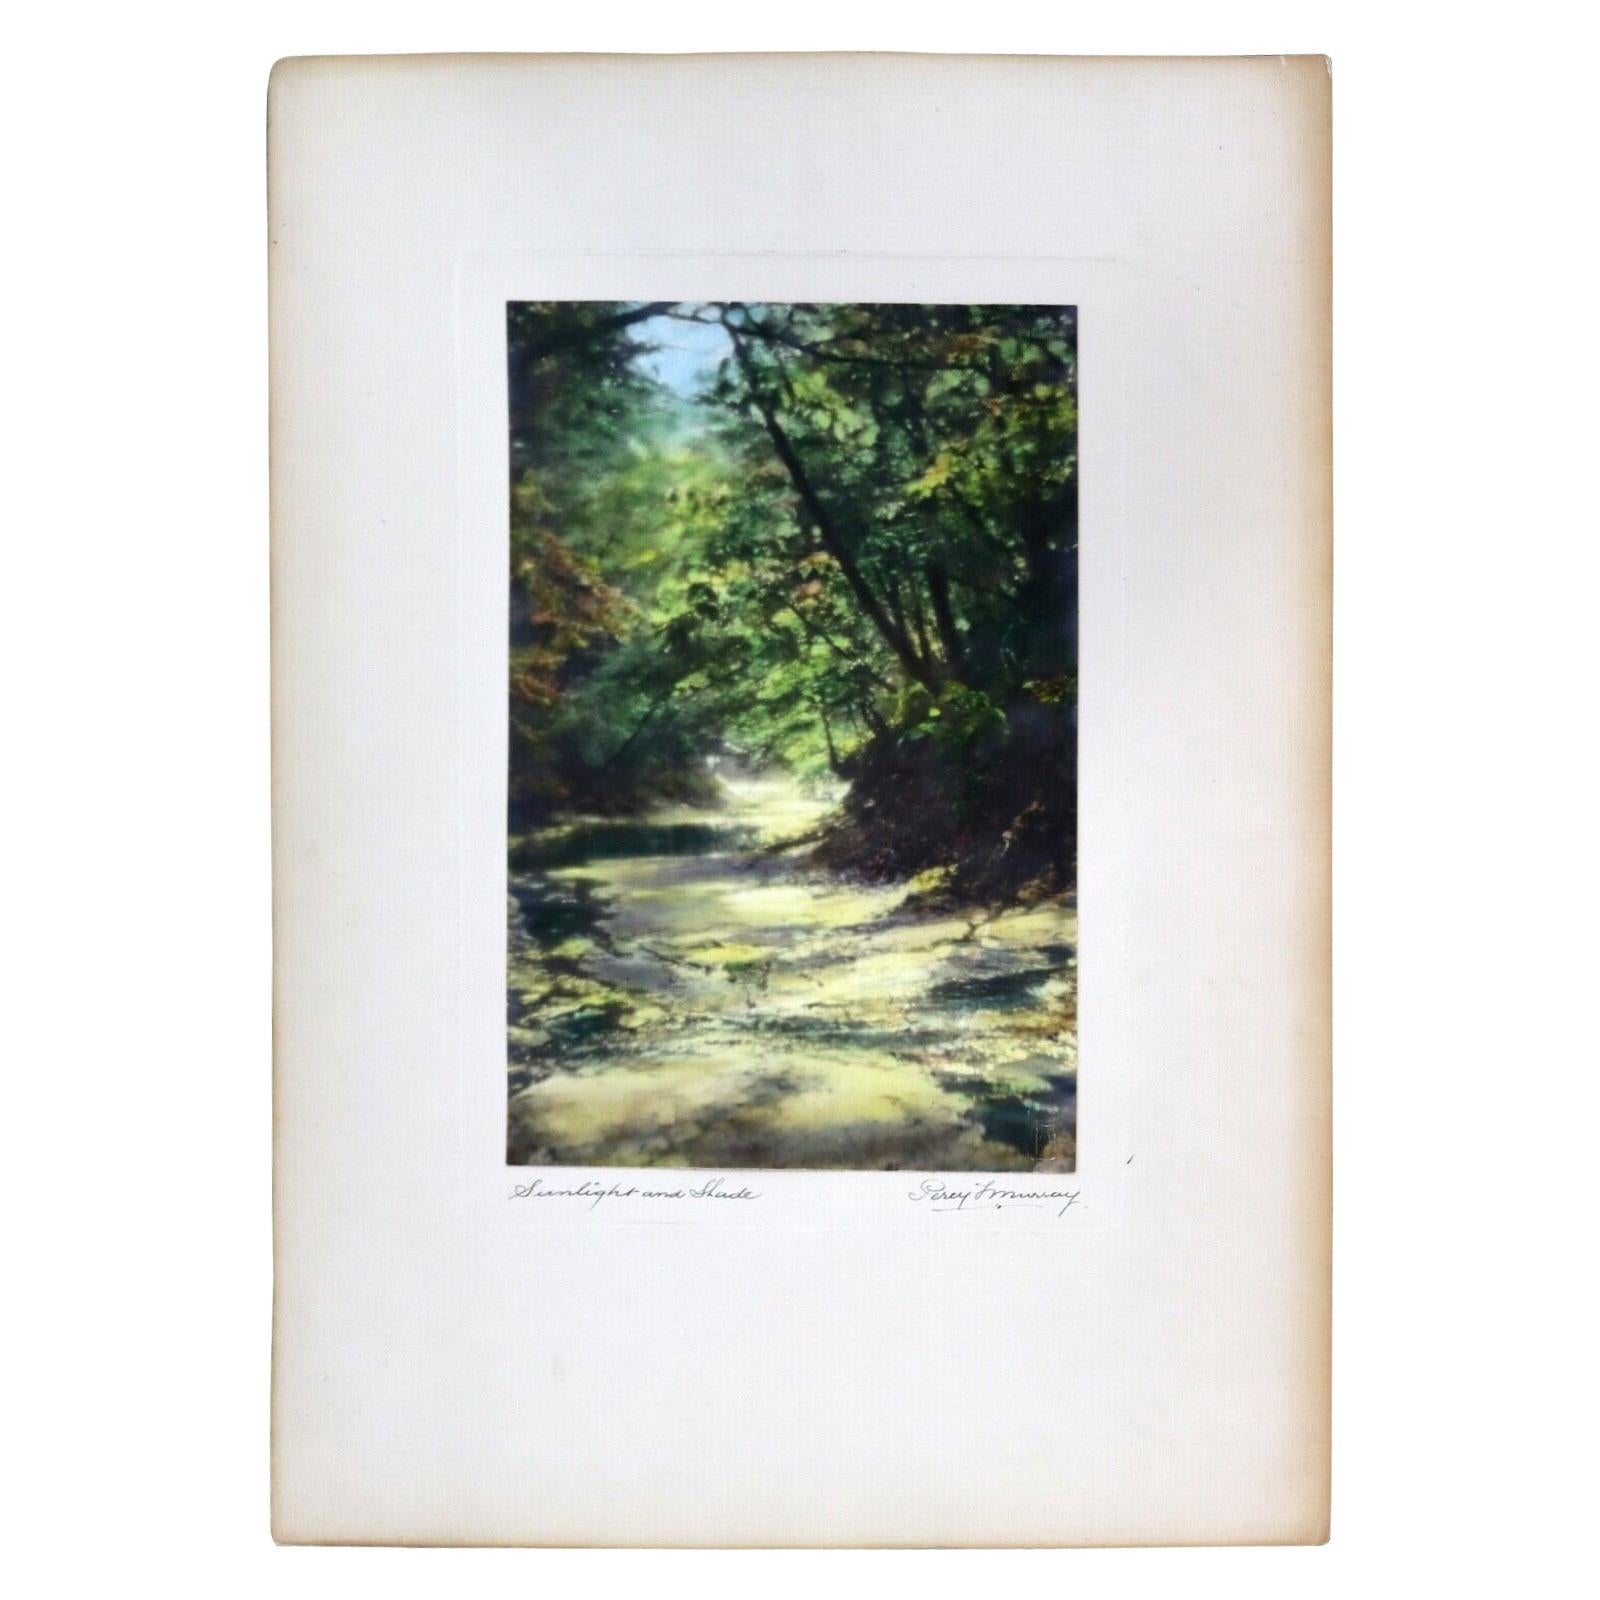 Photo vintage signée Percy Murray Sunlight and Shade